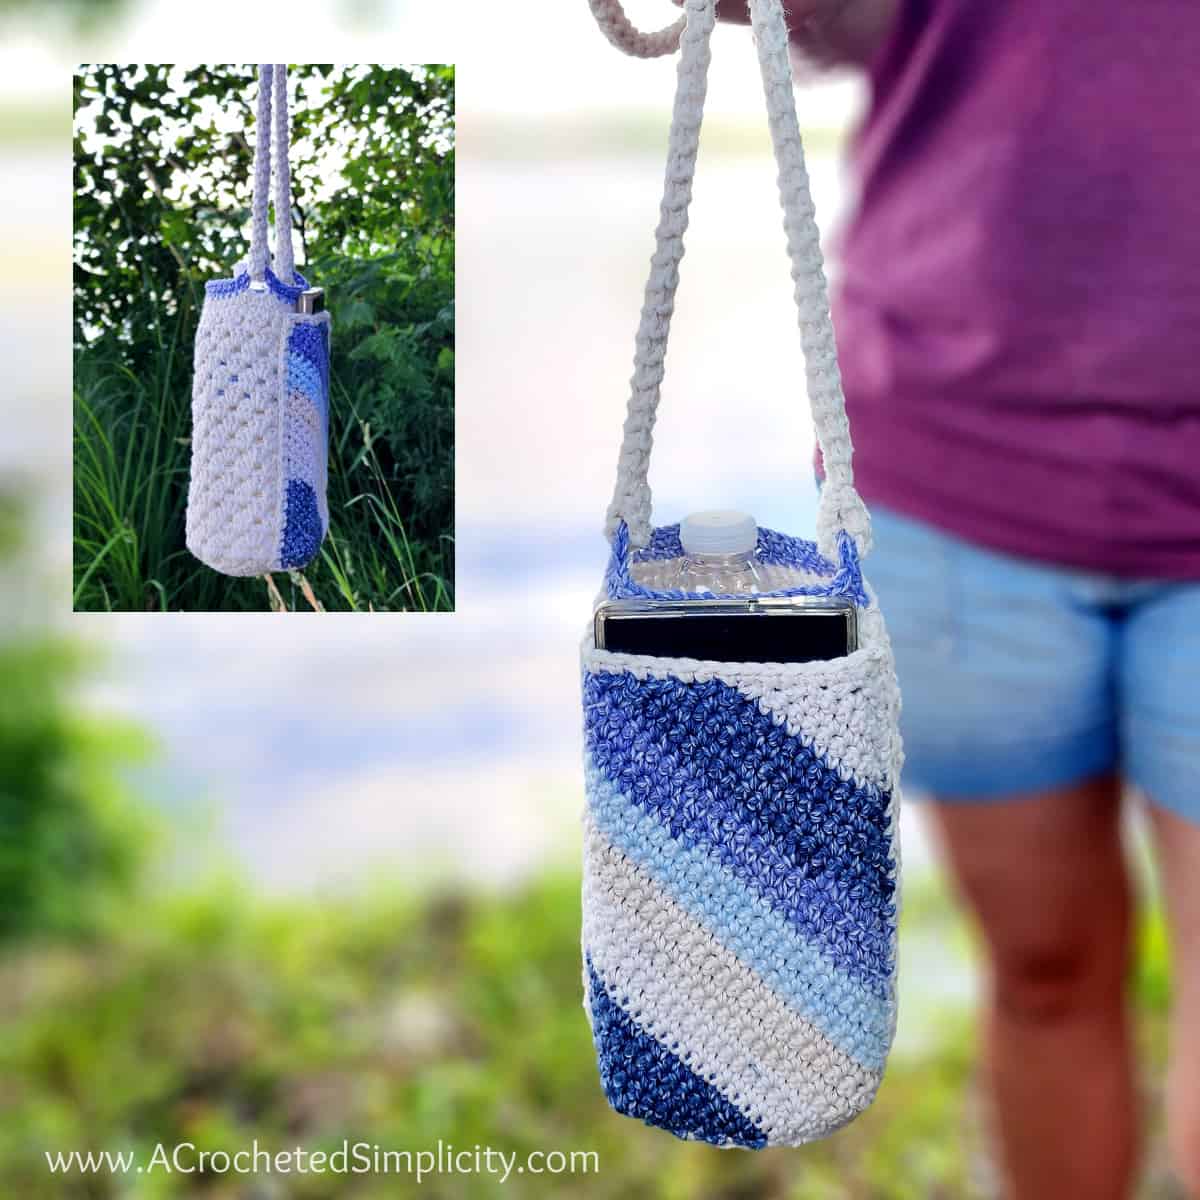 Vacation Style Crochet Bag With Adjustable Shoulder Strap